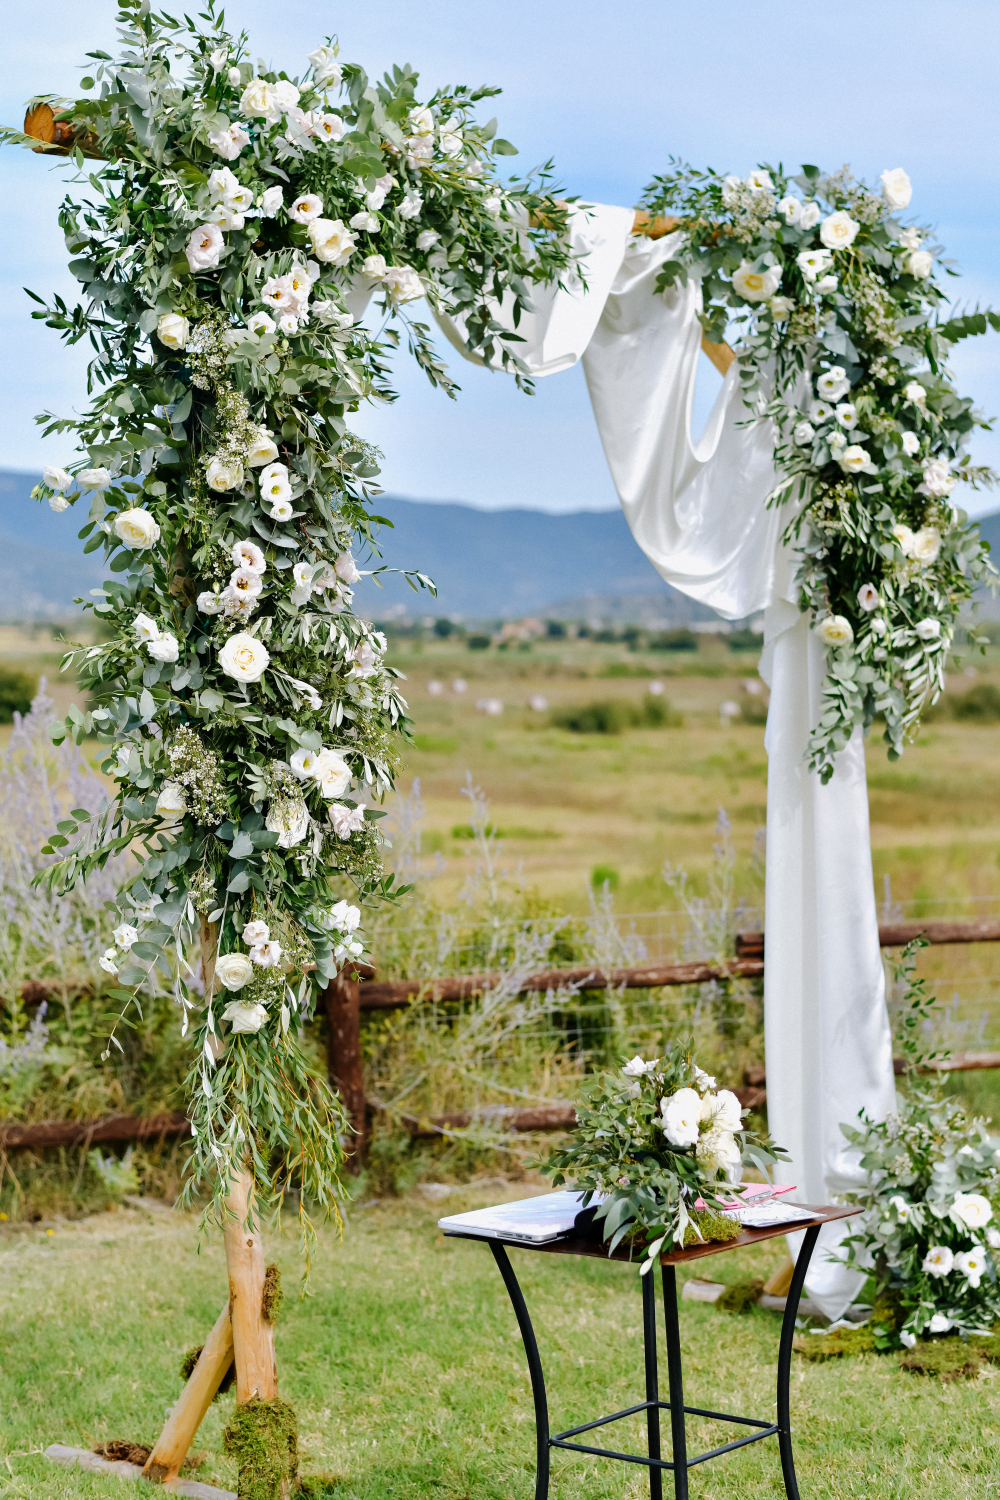 ecorated wedding arch with greenery and white eustomas